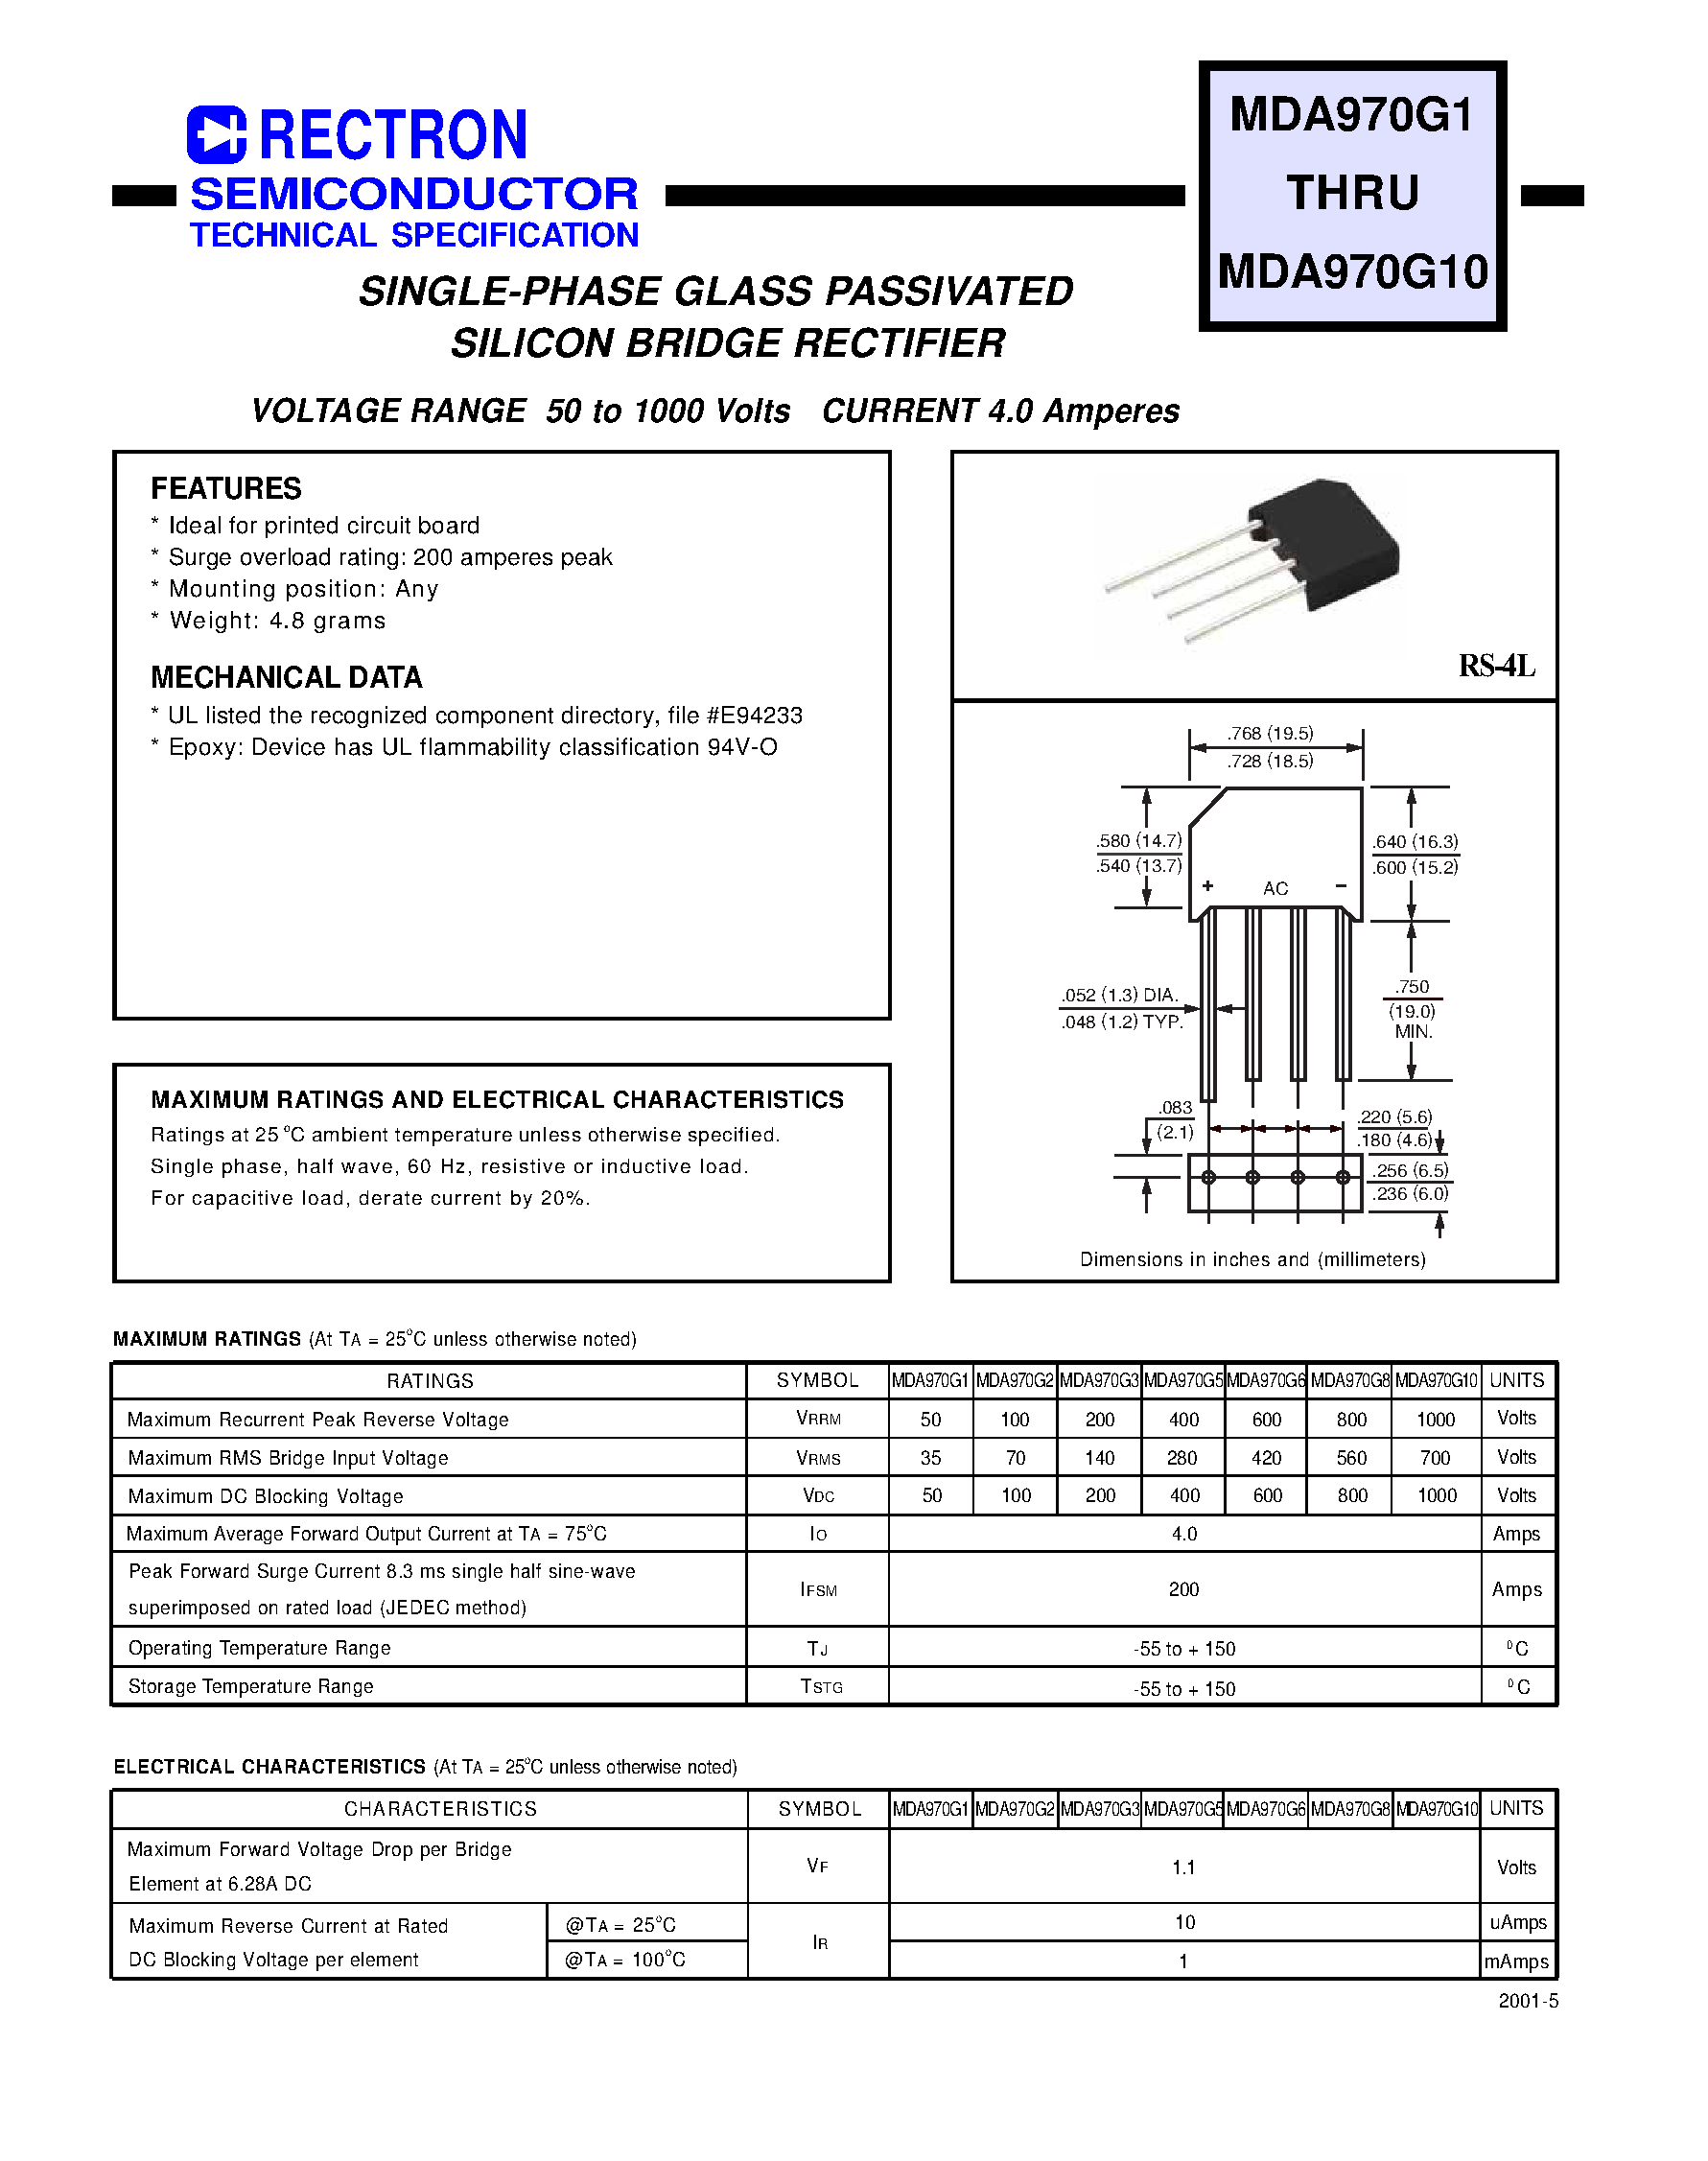 Datasheet MDA970G8 - SINGLE-PHASE GLASS PASSIVATED SILICON BRIDGE RECTIFIER (VOLTAGE RANGE 50 to 1000 Volts CURRENT 4.0 Amperes) page 1